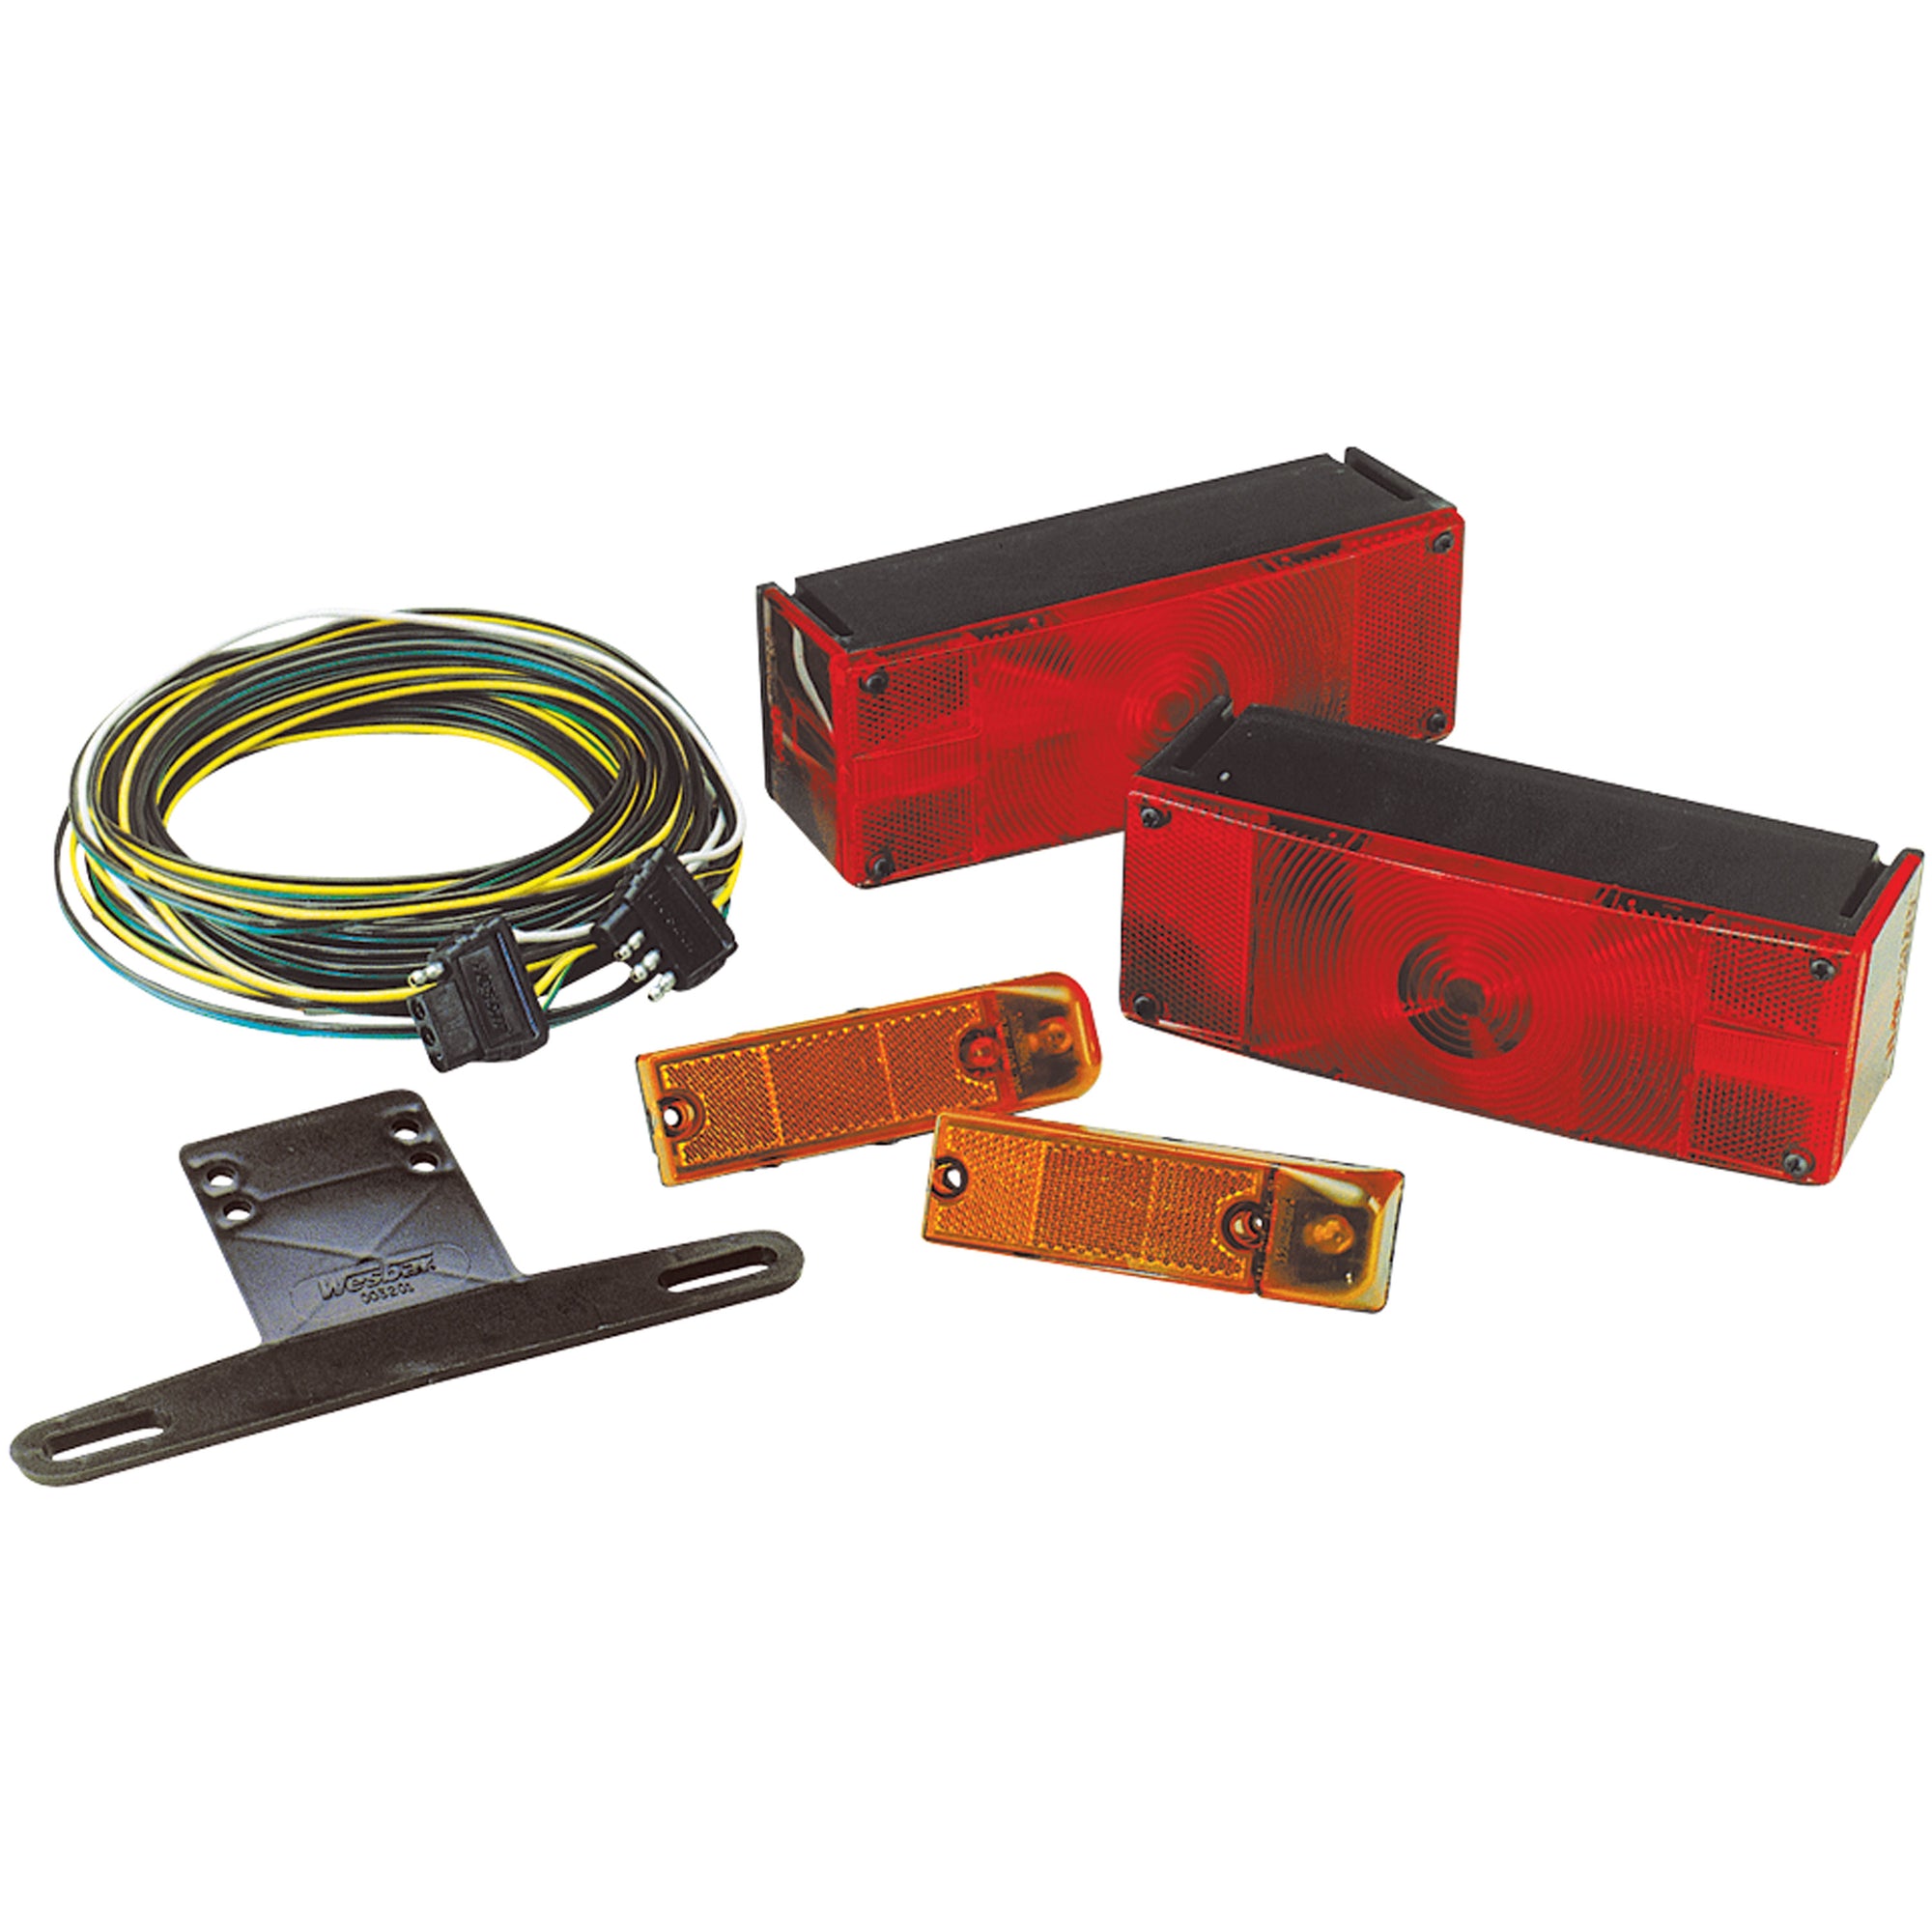 Wesbar 007509 Waterproof Low-Profile Taillight Kit with 25' Harness